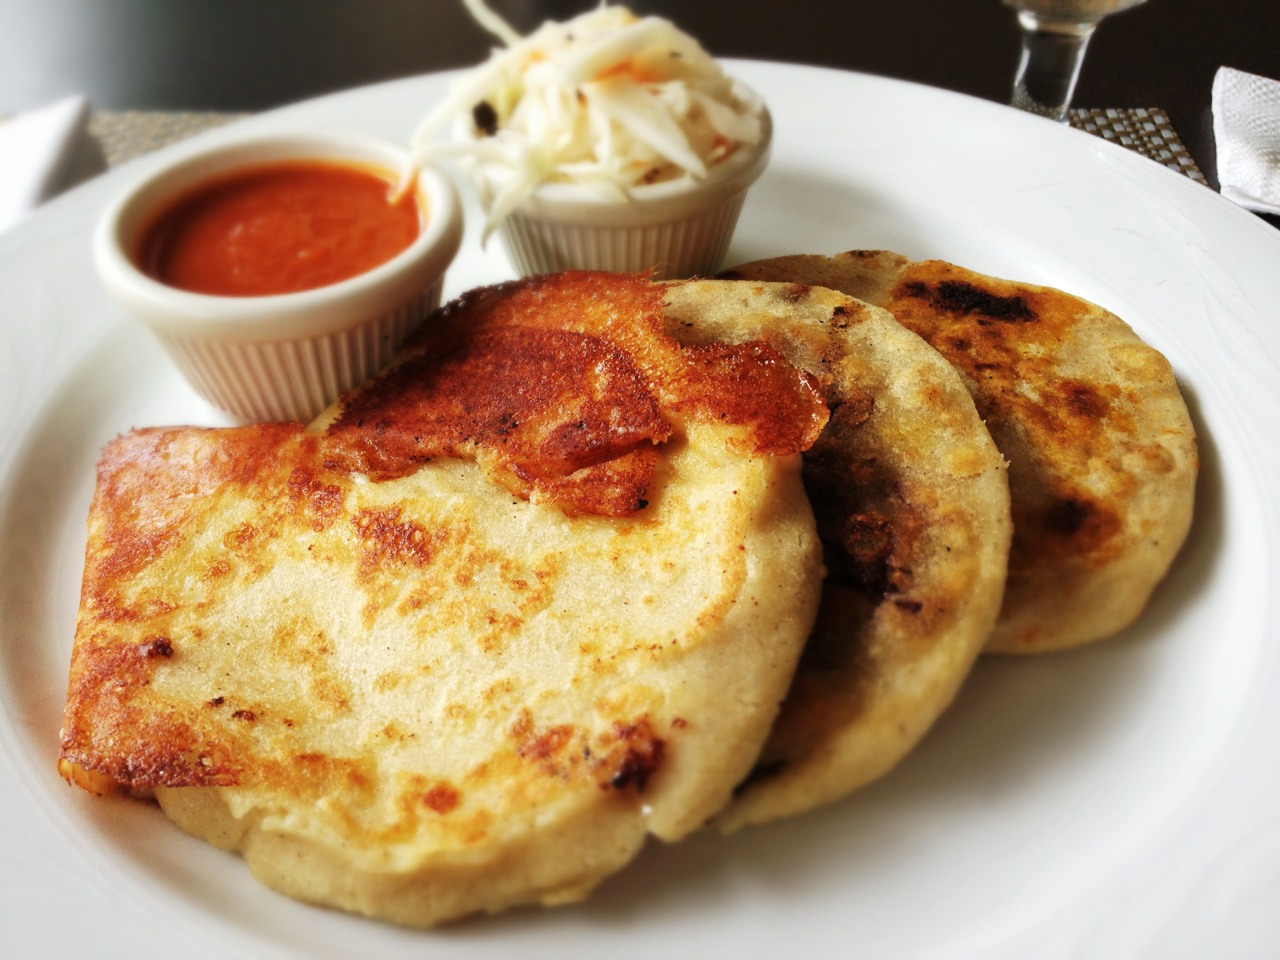 Since at least 2013, 7-Eleven has been serving pupusas in places like Calif...